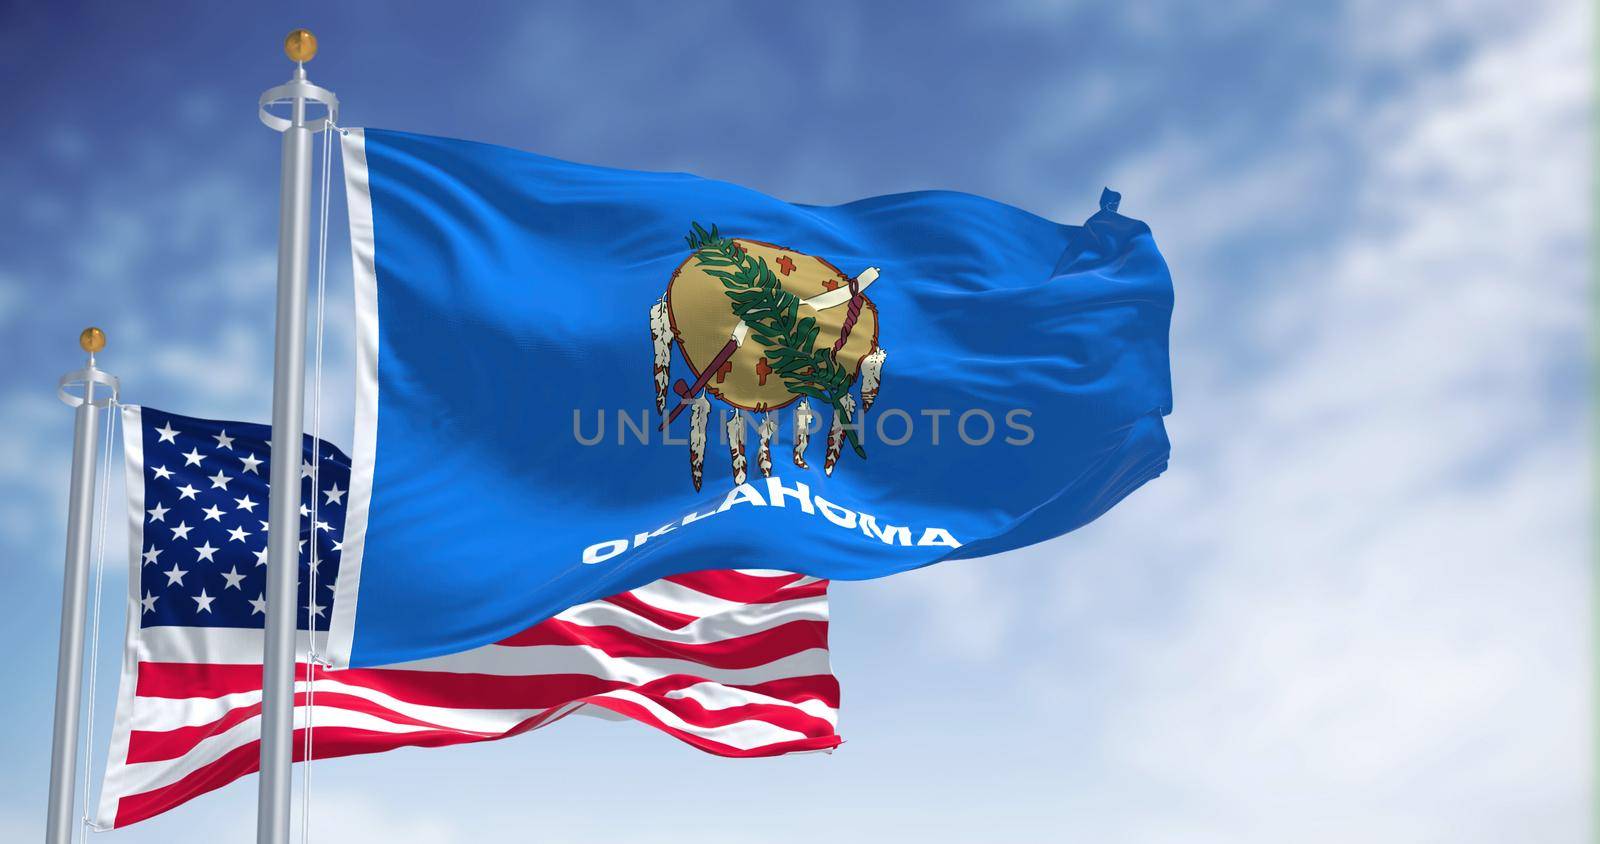 The Oklahoma state flag waving along with the national flag of the United States of America. Oklahoma is a state in the South Central region of the United States